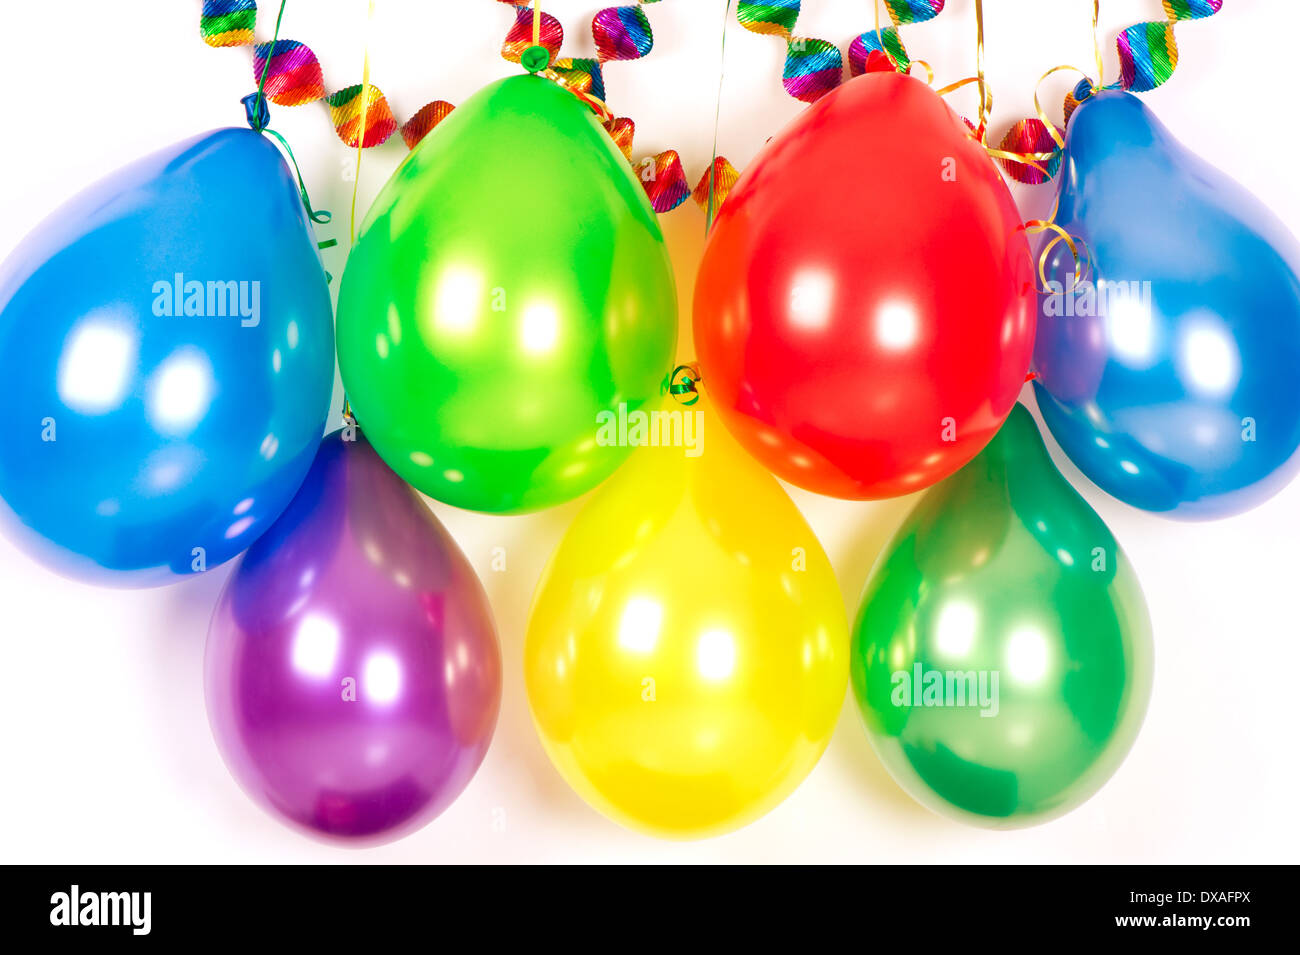 Colorful balloons and garlands. Party decoration Stock Photo